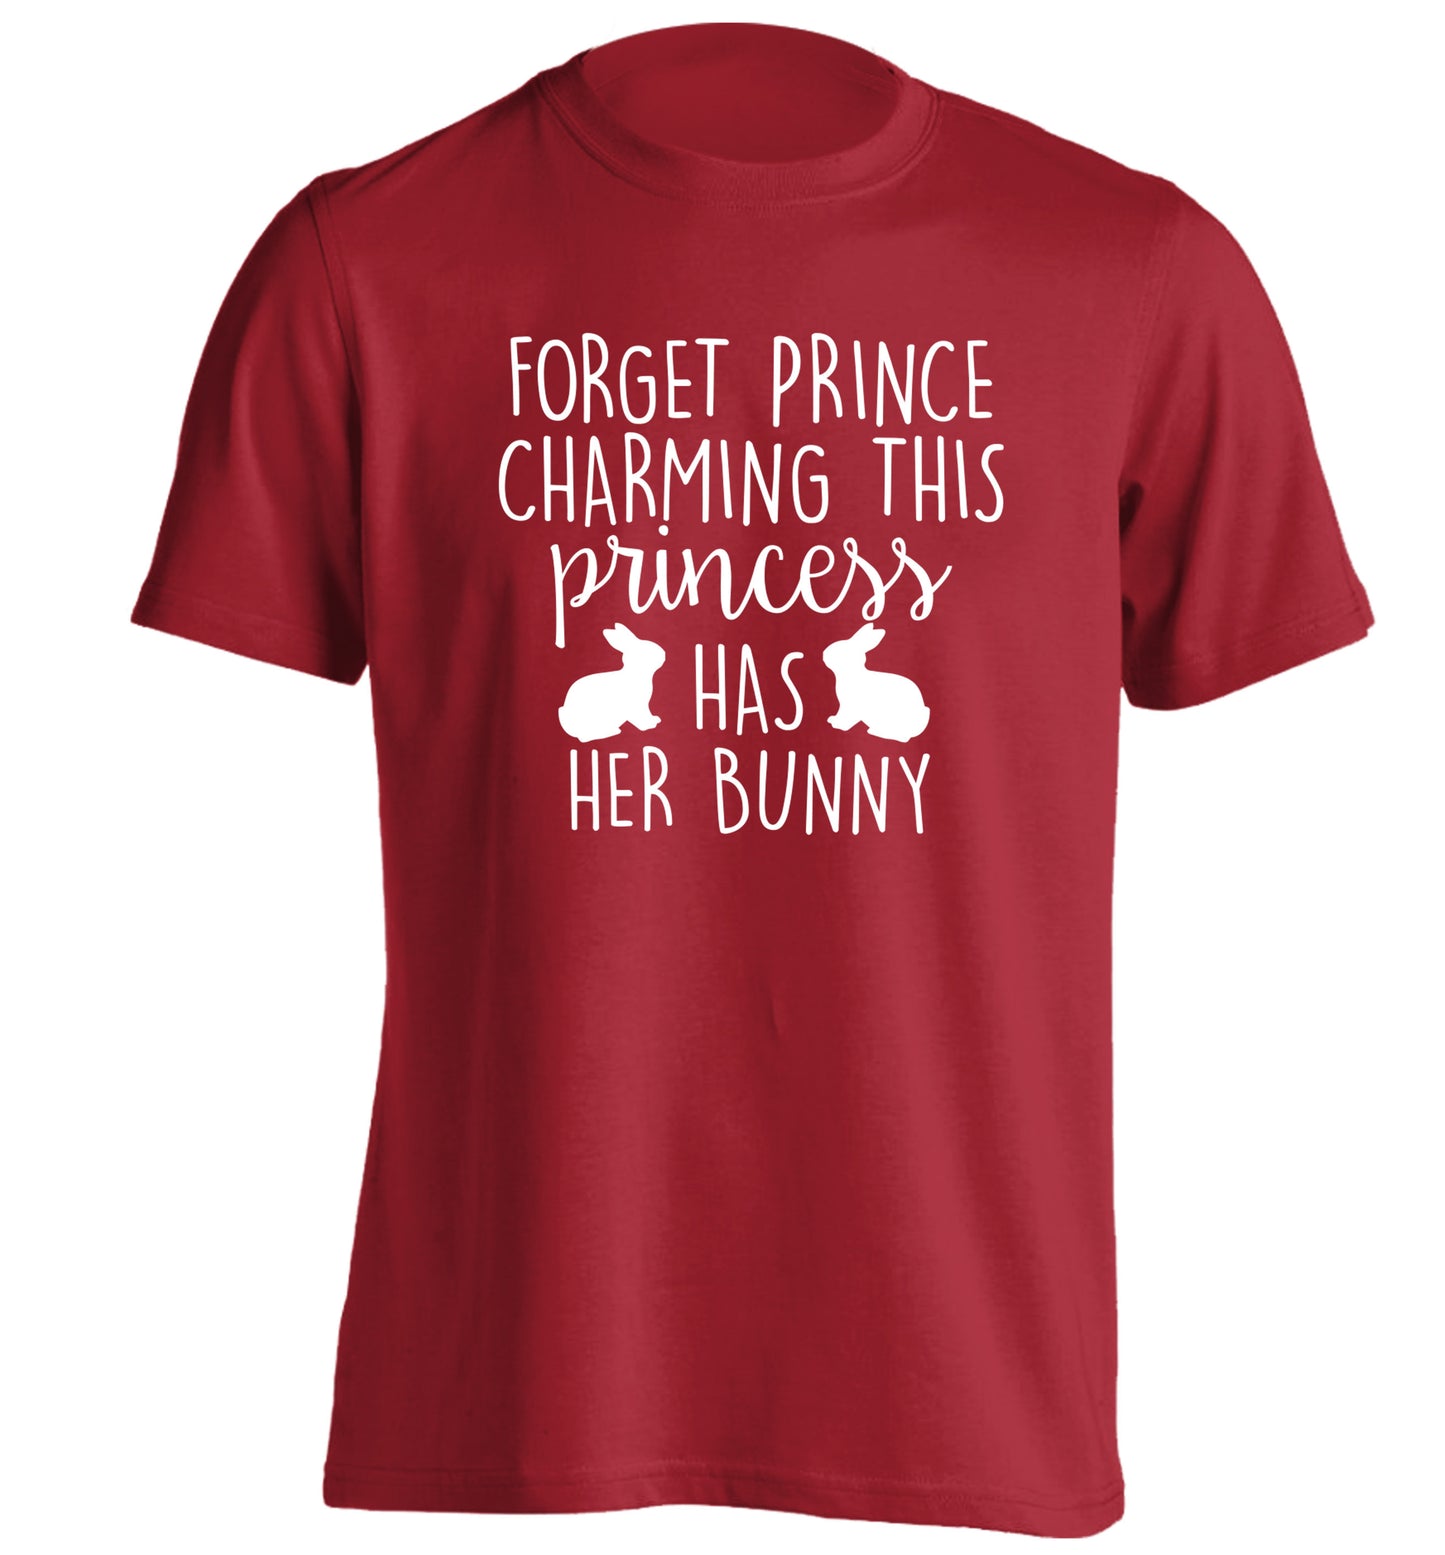 Forget prince charming this princess has her bunny adults unisex red Tshirt 2XL